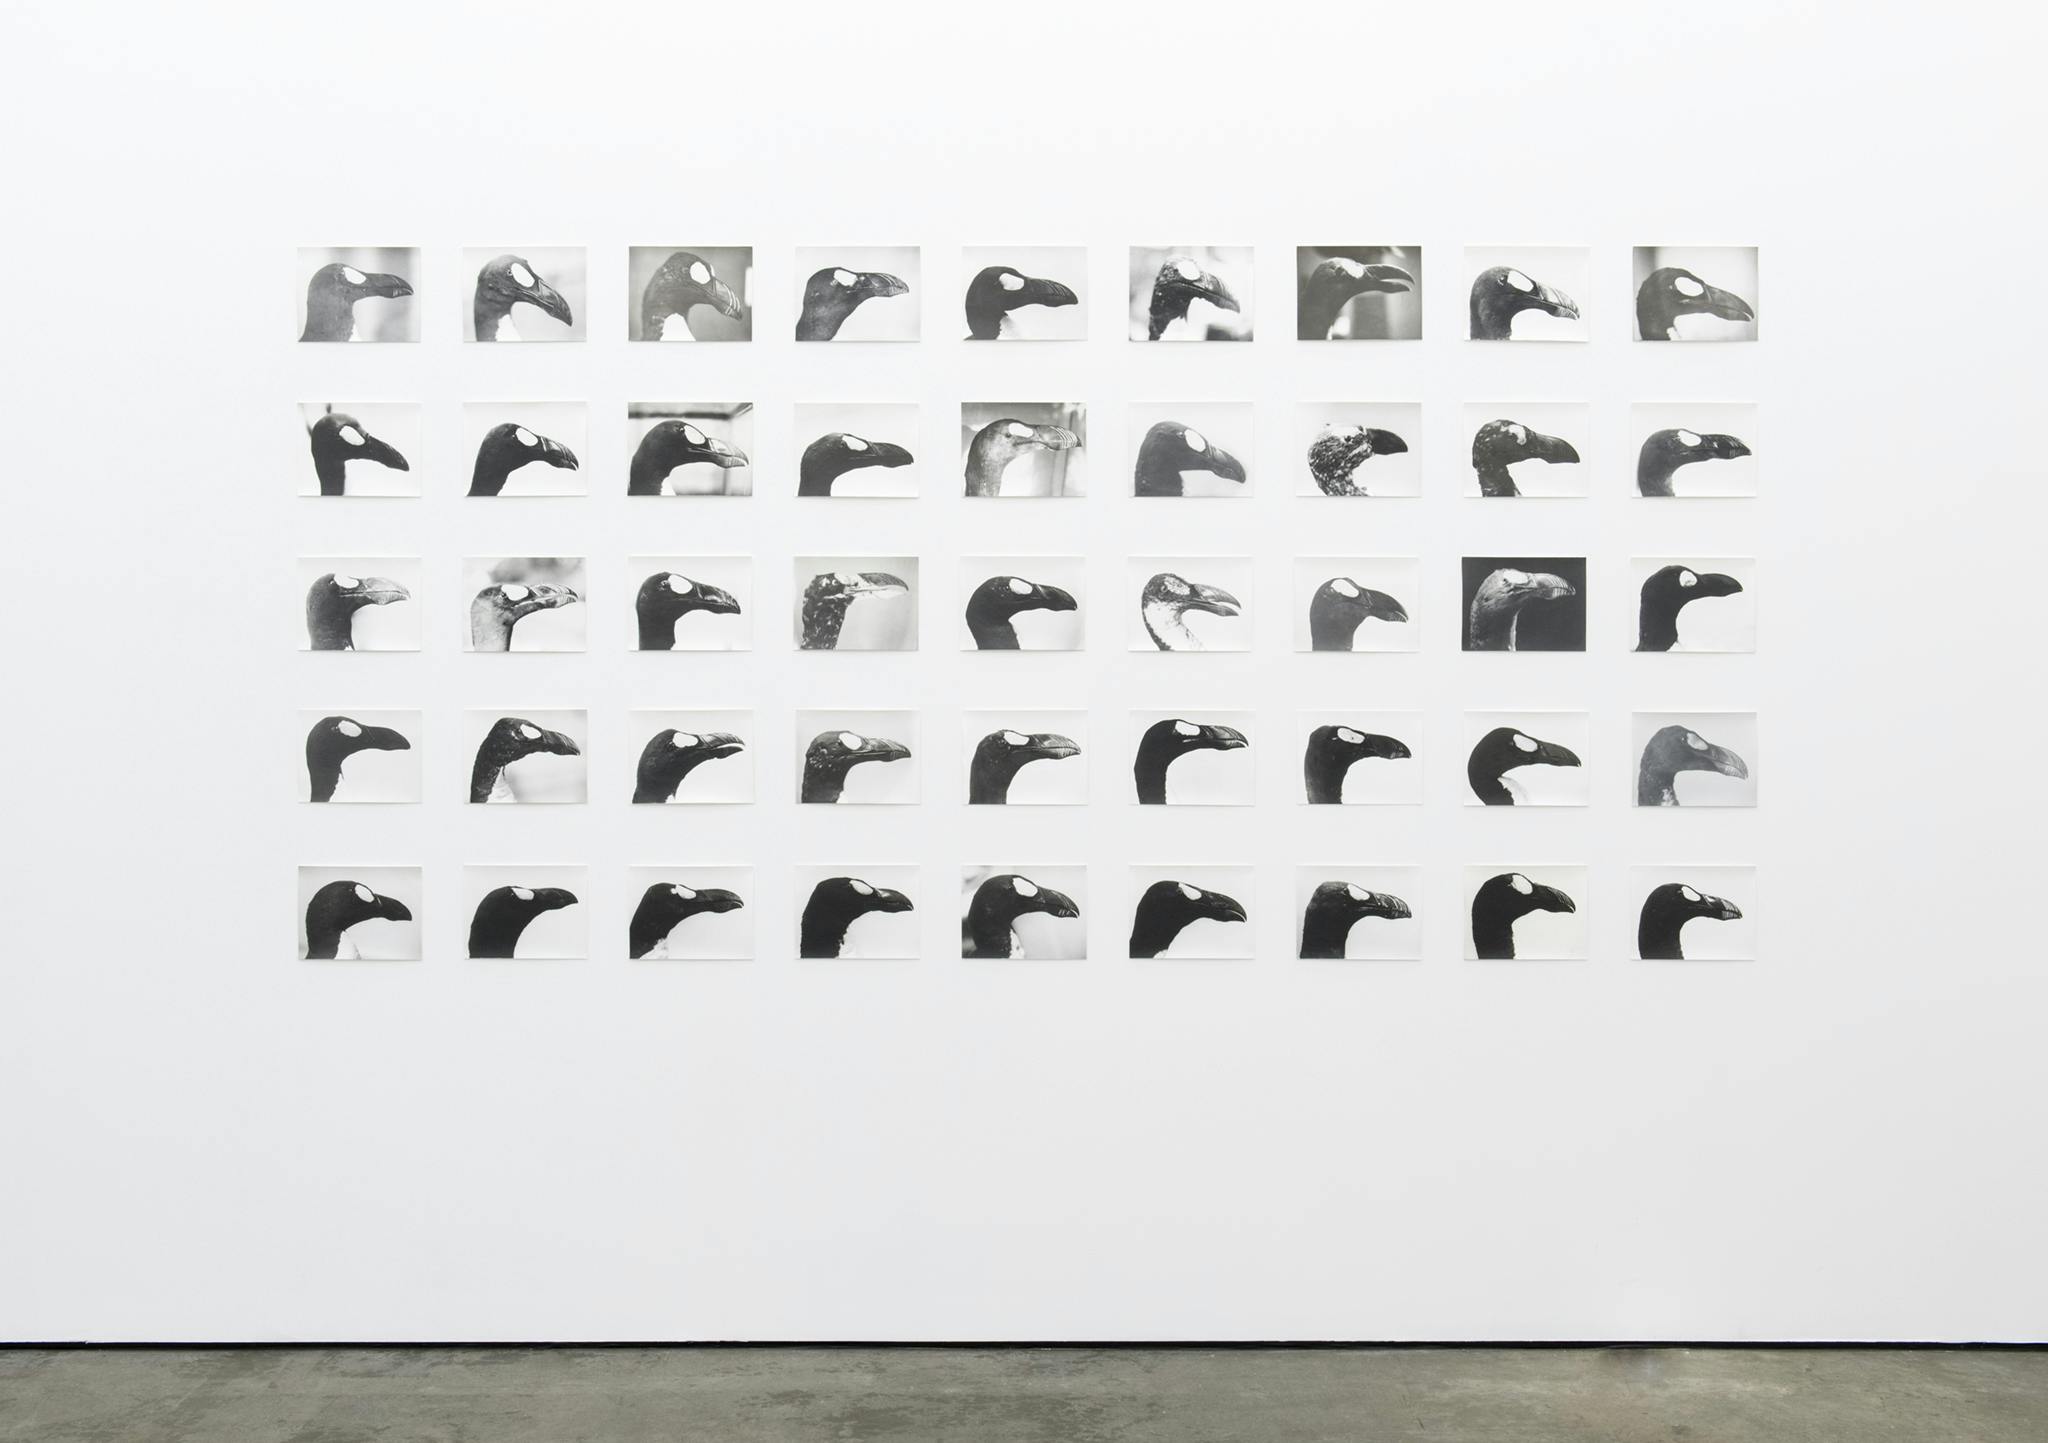 A nine by five grid of small black and white photographs which each depict the profile of a birds head.